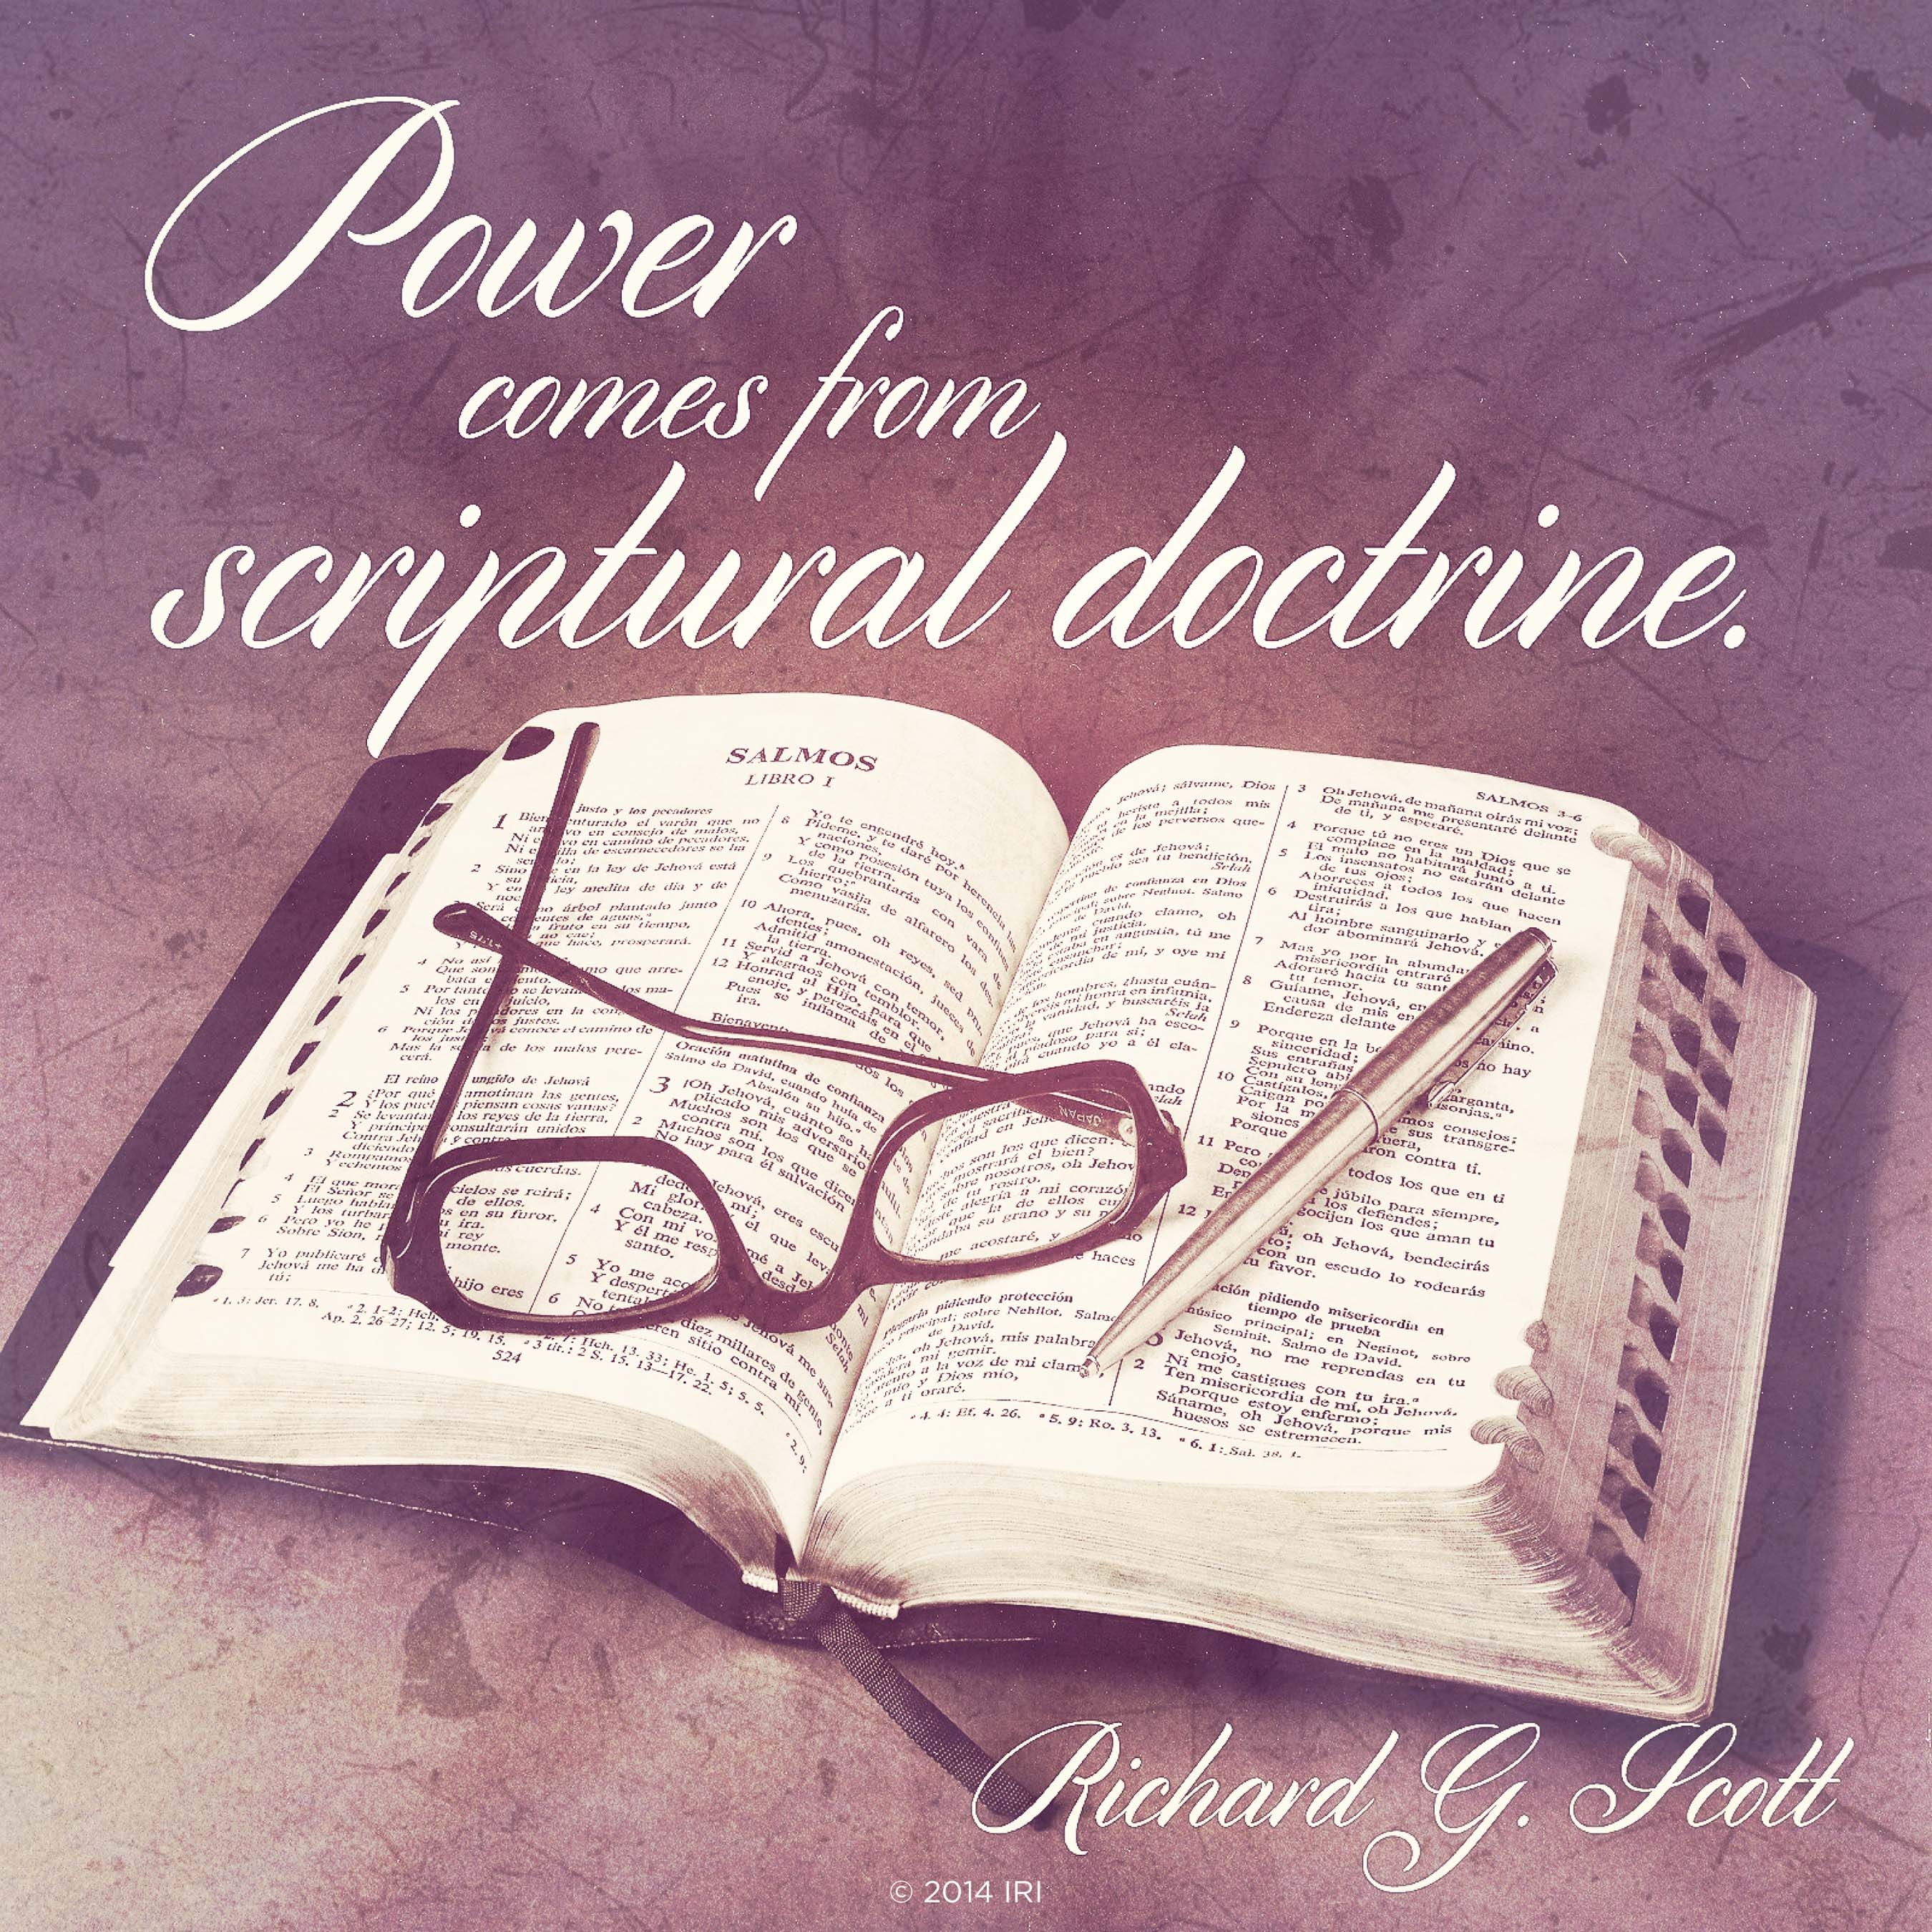 An image of the scriptures coupled with a quote by Elder Richard G. Scott: “Power comes from scriptural doctrine.”